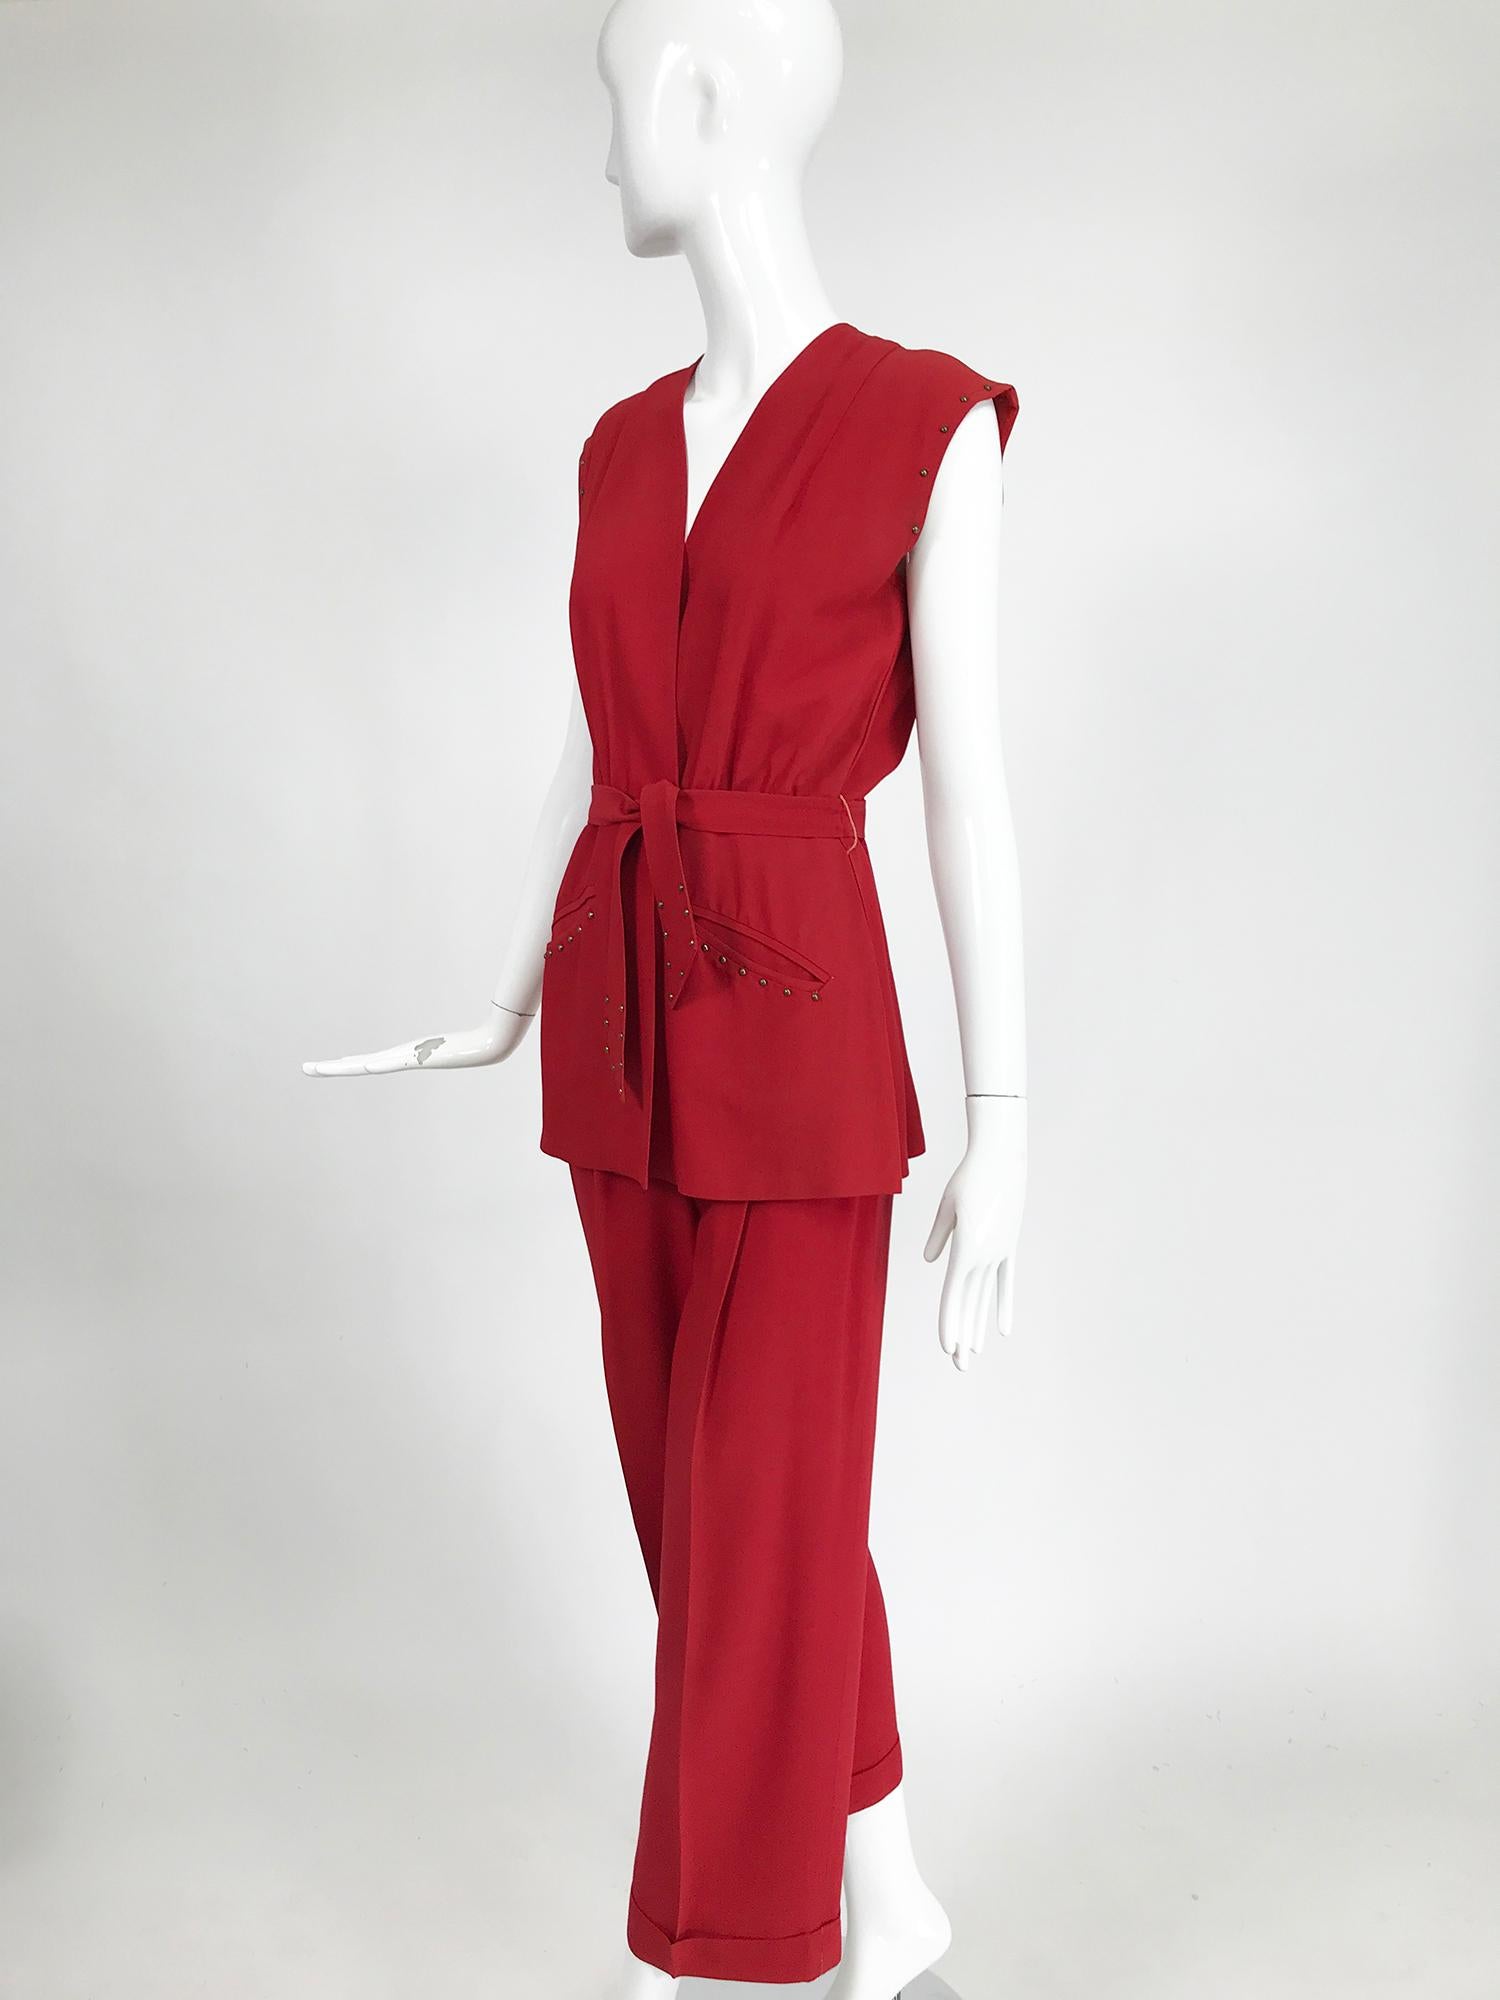 1940s Made in California, by International Sportswear, wine red rayon gabardine pant set with brass stud detail. Sleeveless wrap top features a belted waist with hidden hook and eyes, angled besom hip pockets and a peplum hem with a 7